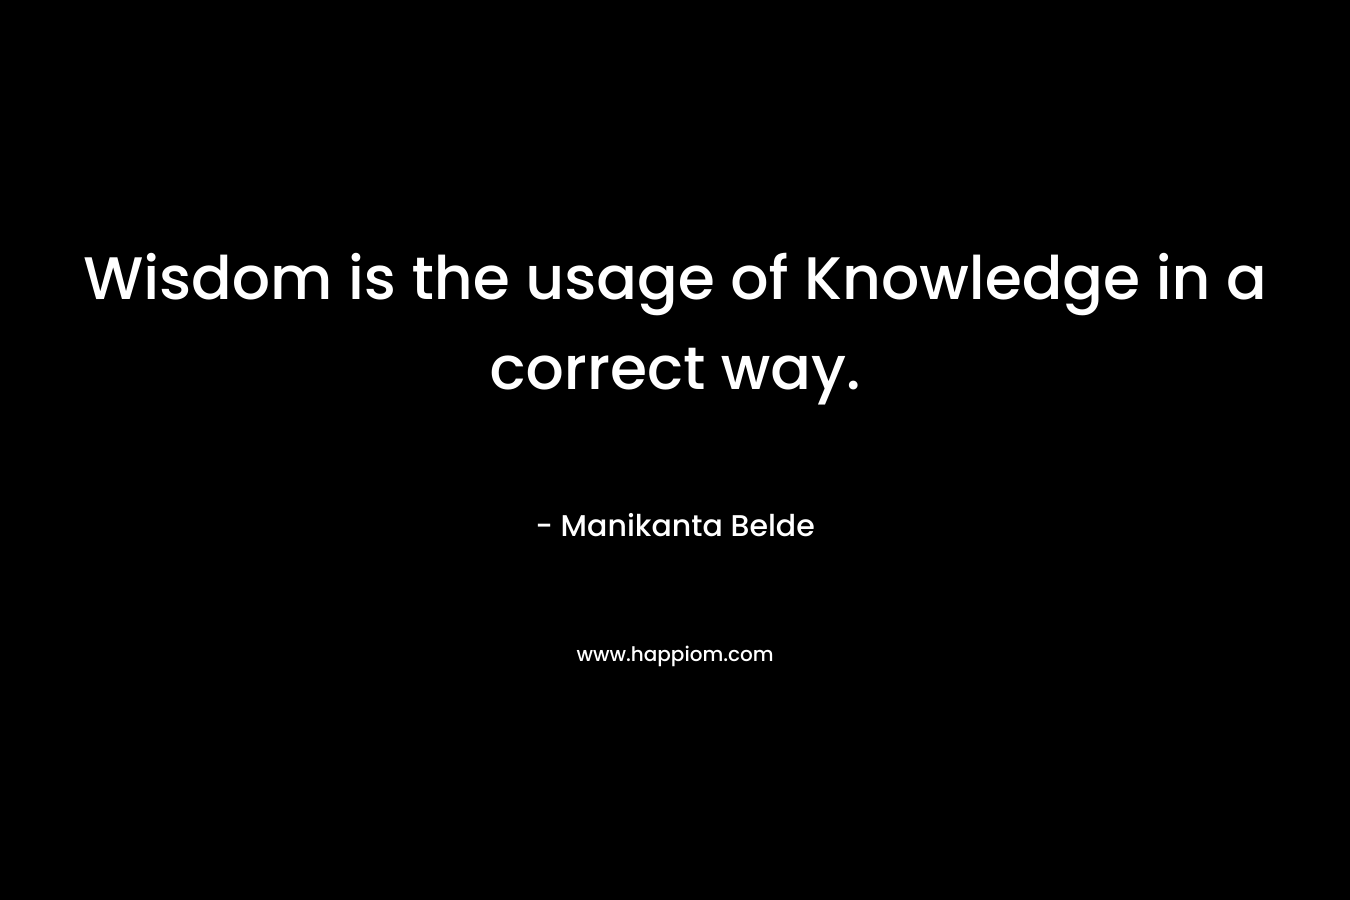 Wisdom is the usage of Knowledge in a correct way.